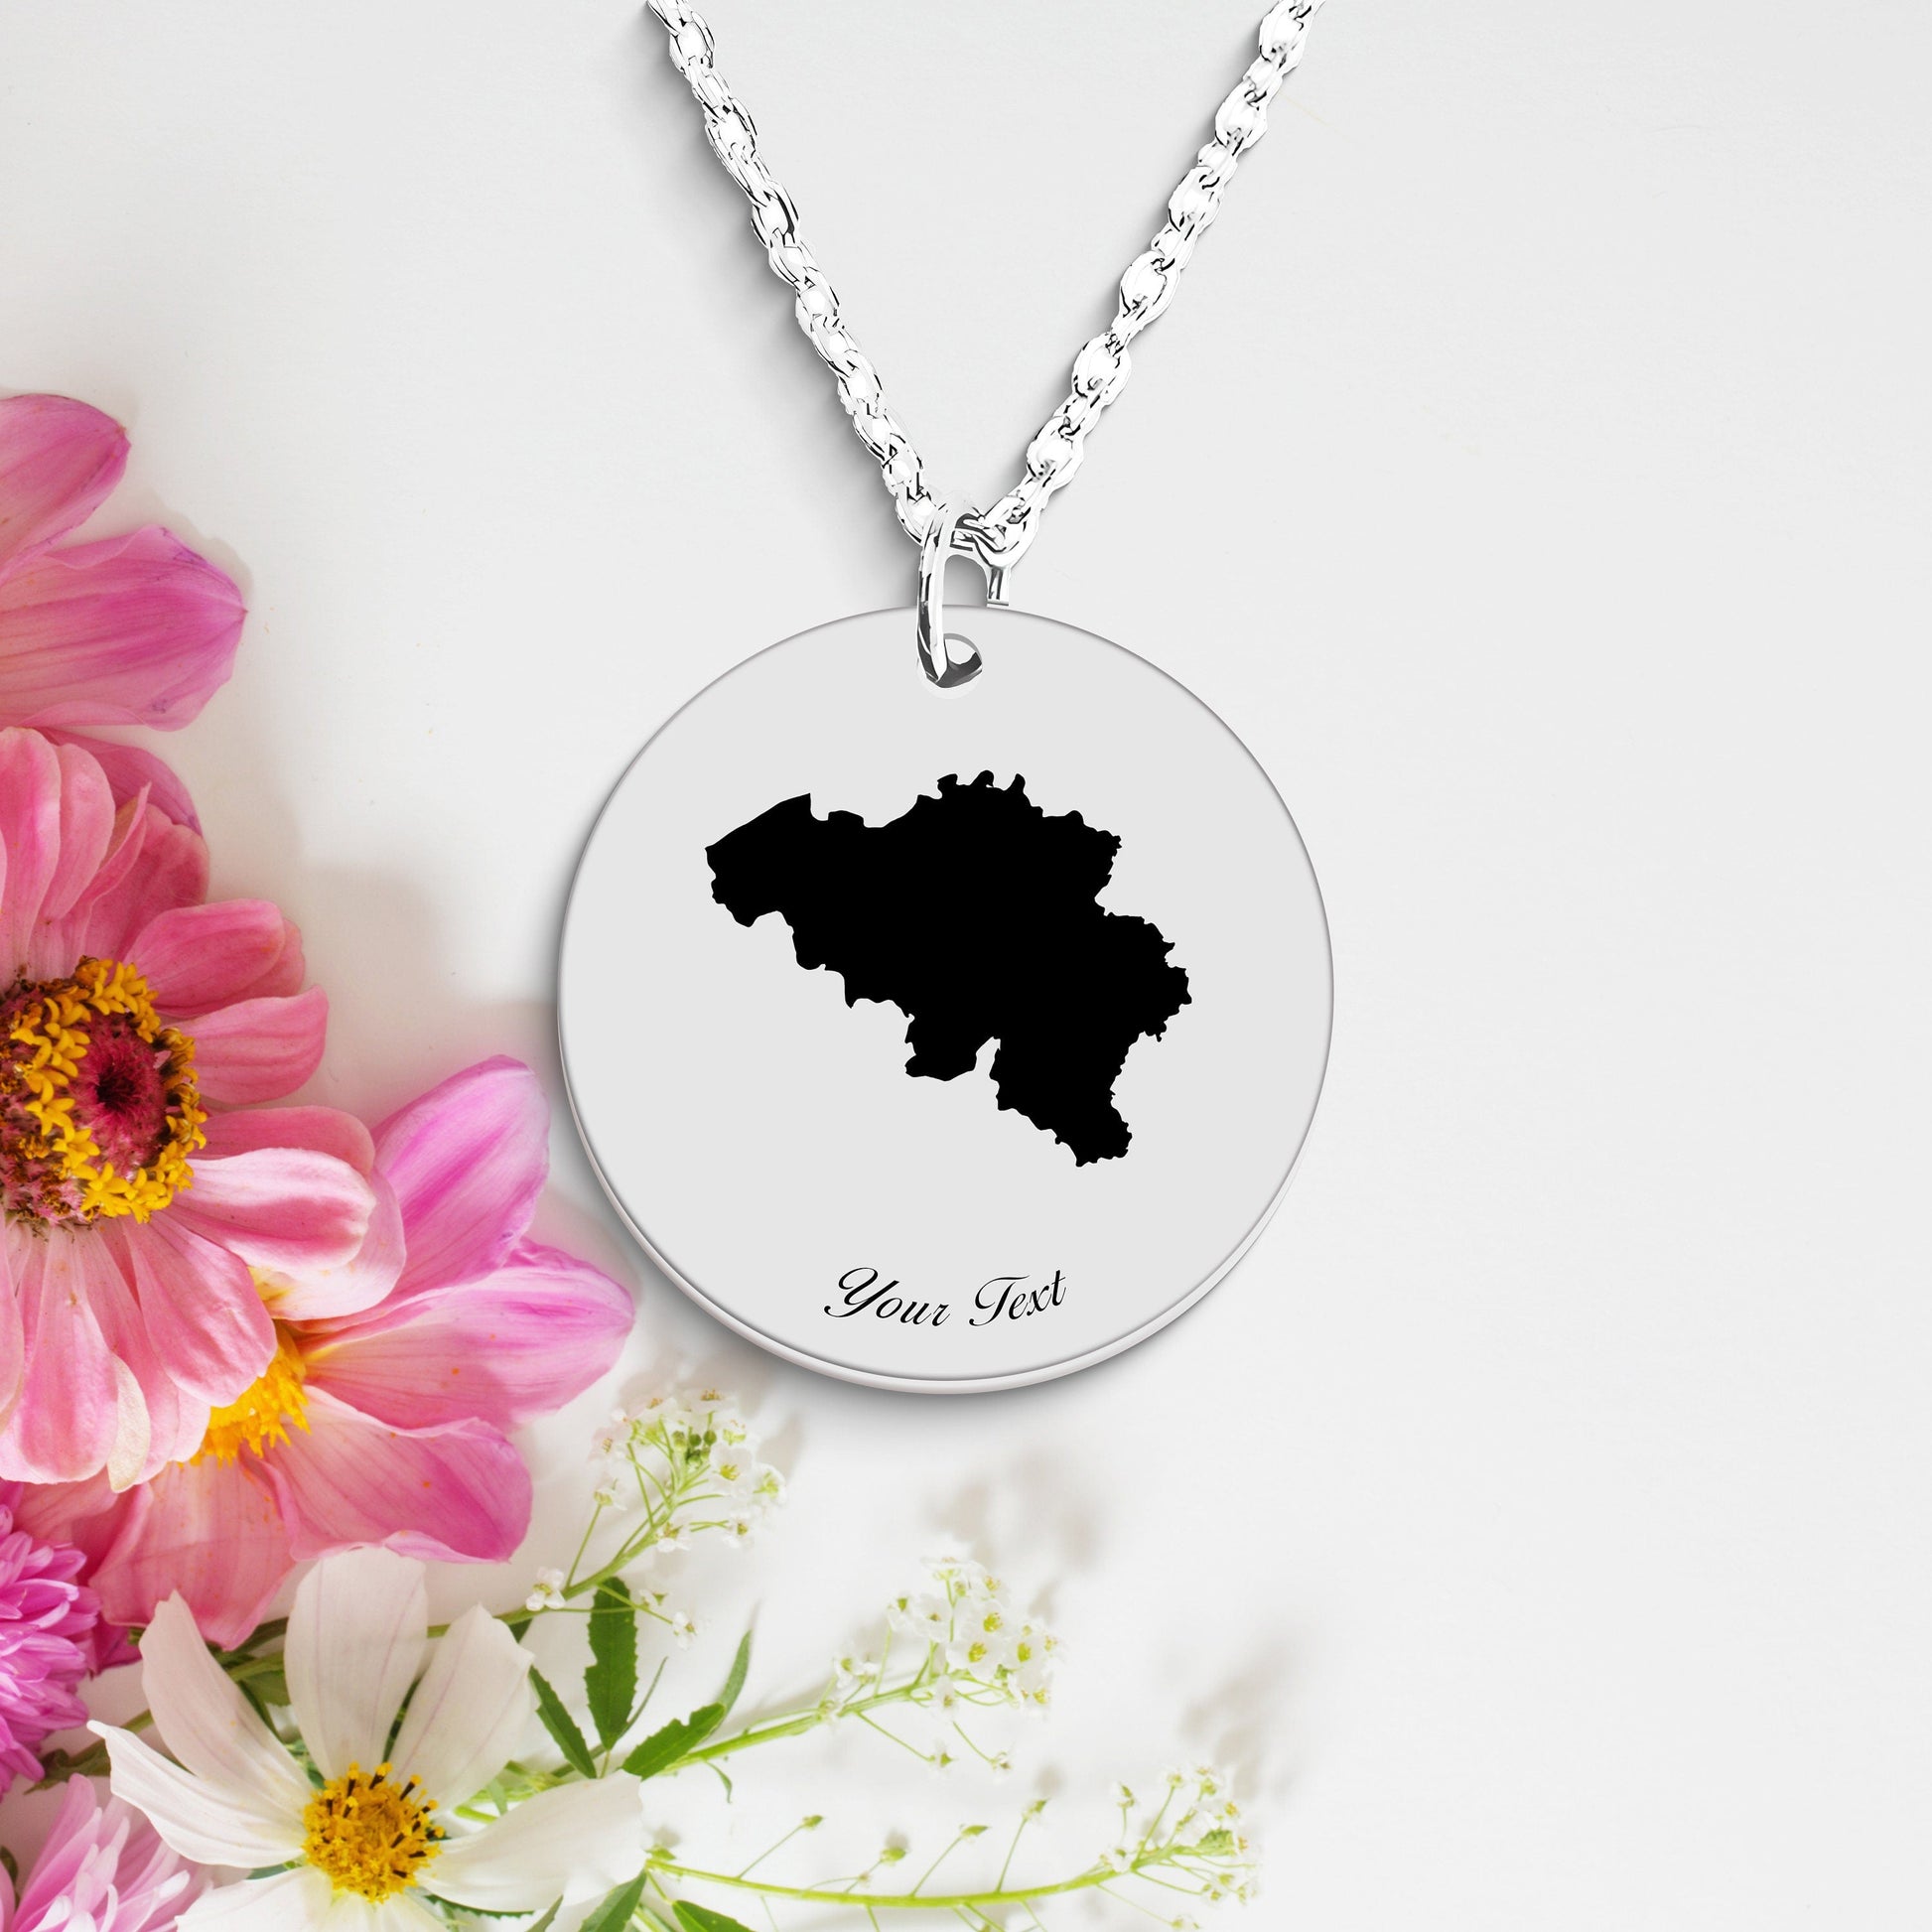 Belgium Country Map Necklace, Your Name Necklace, Minimalist Necklace, Personalized Gift, Silver Necklace, Gift For Him Her